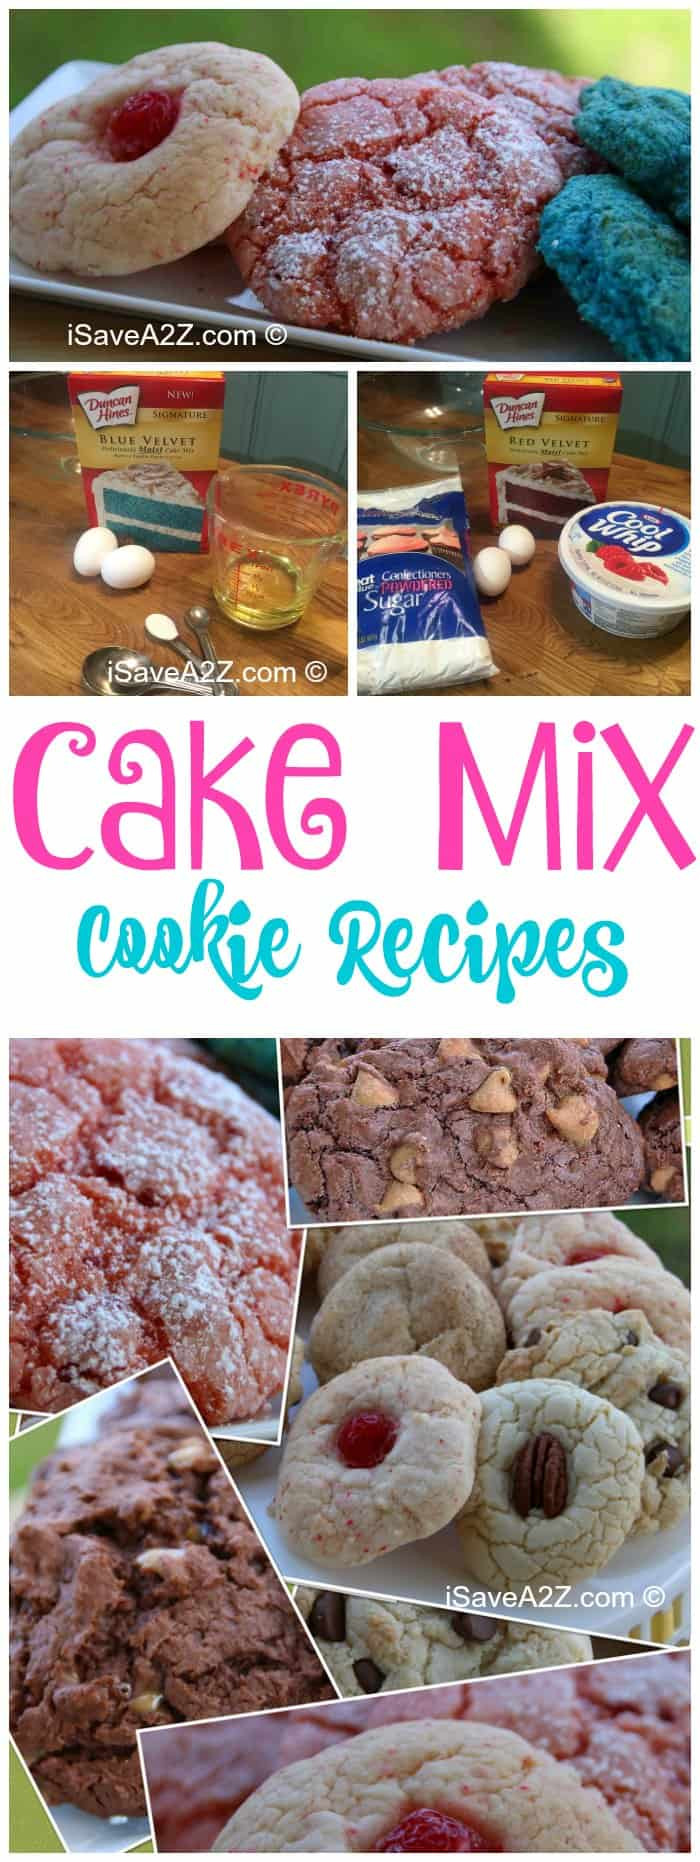 Recipes For Cake Mix Cookies
 Top 45 Recipe Variations for Cake Mix Cookies iSaveA2Z